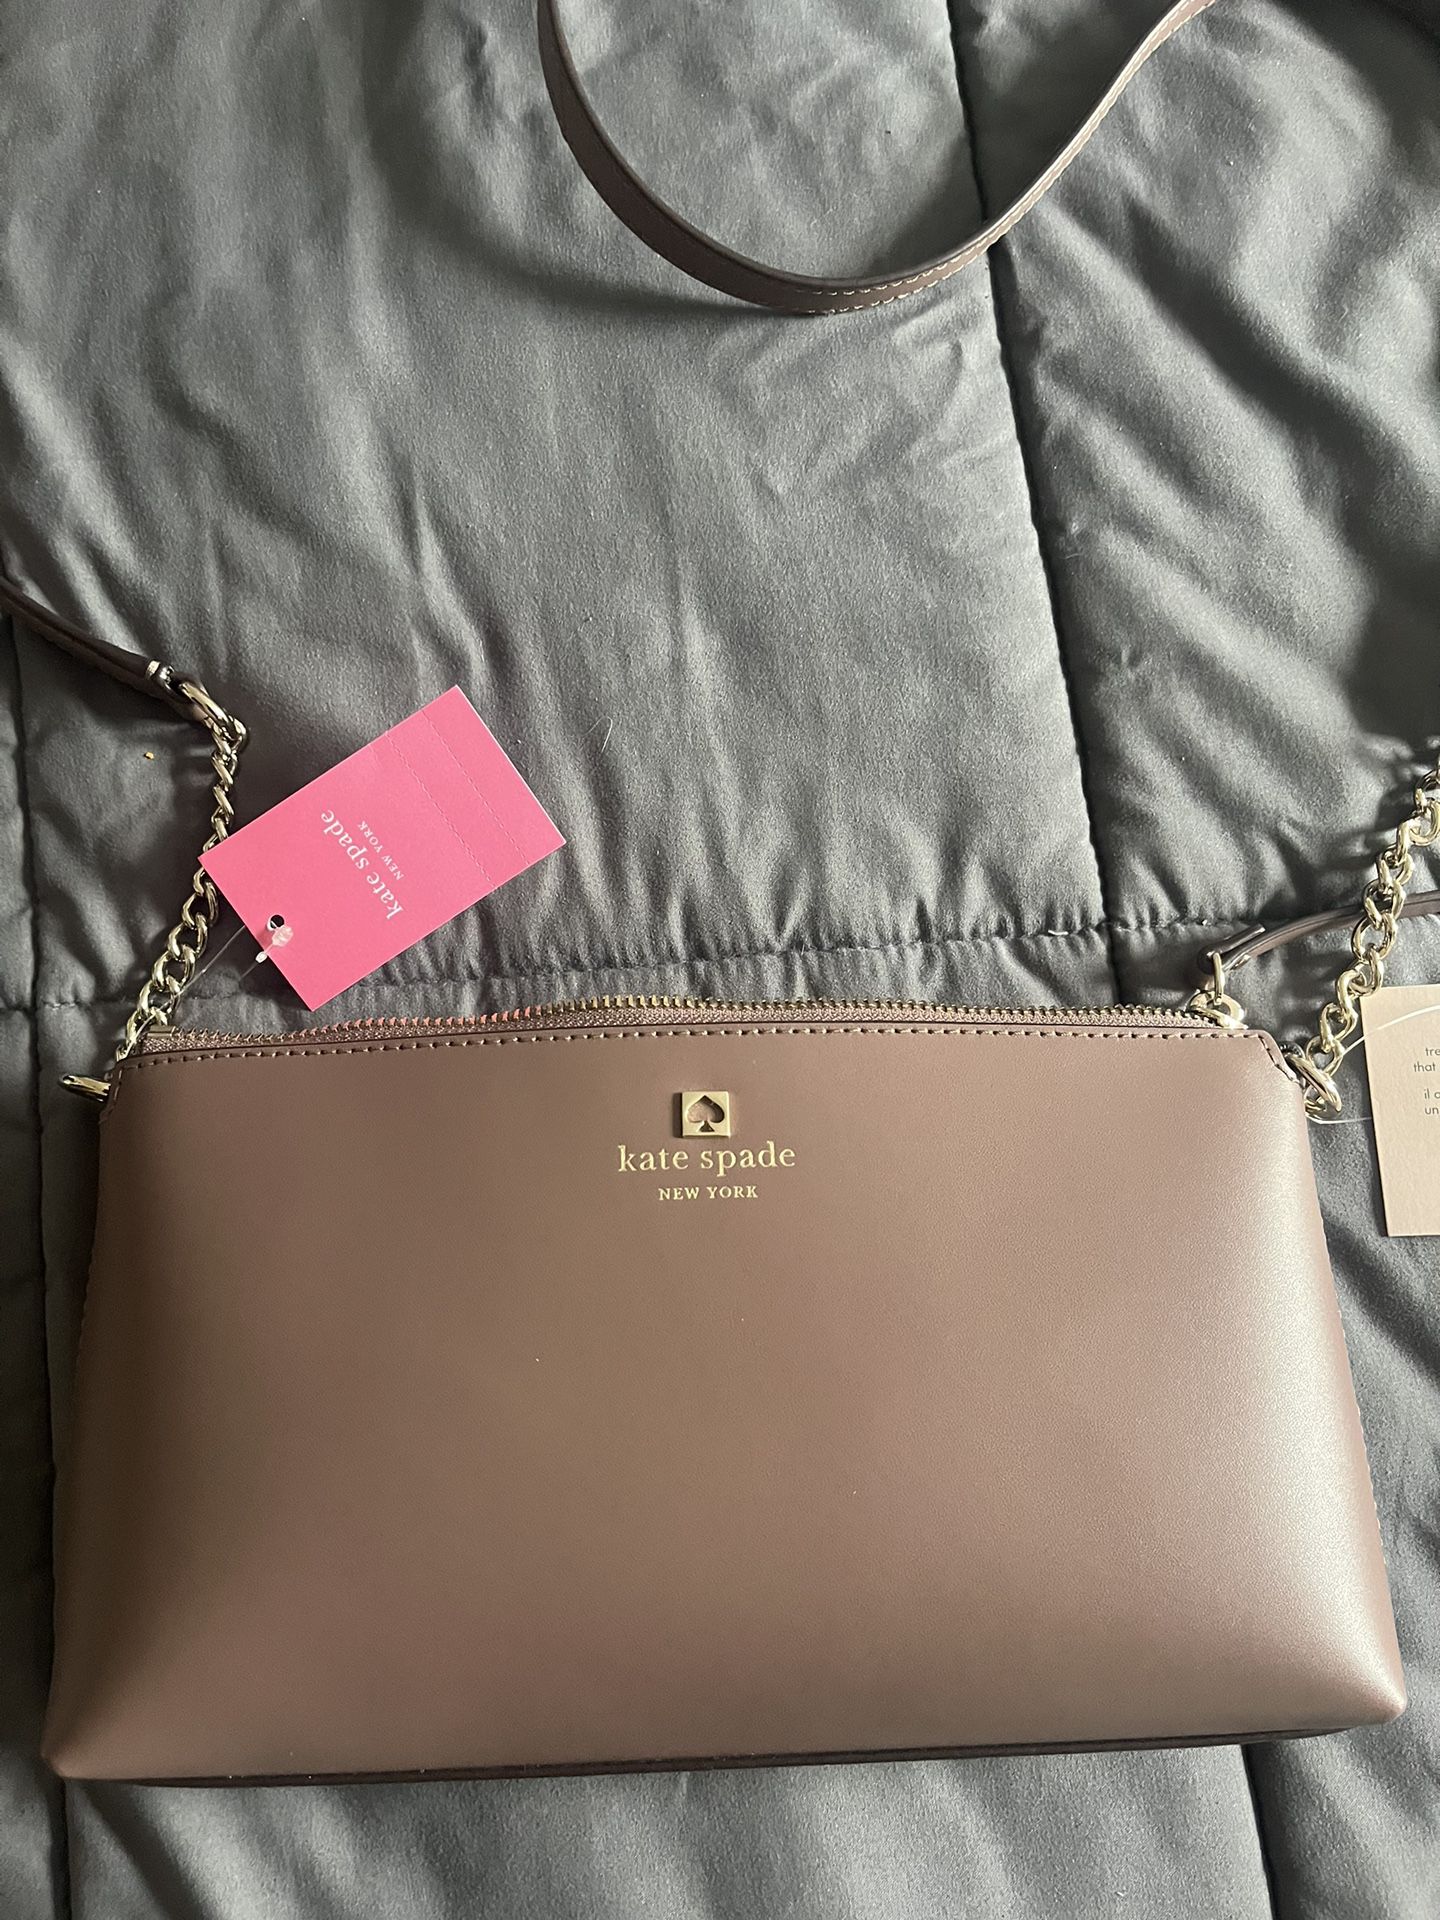 Chanel Bag for Sale in Moreno Valley, CA - OfferUp